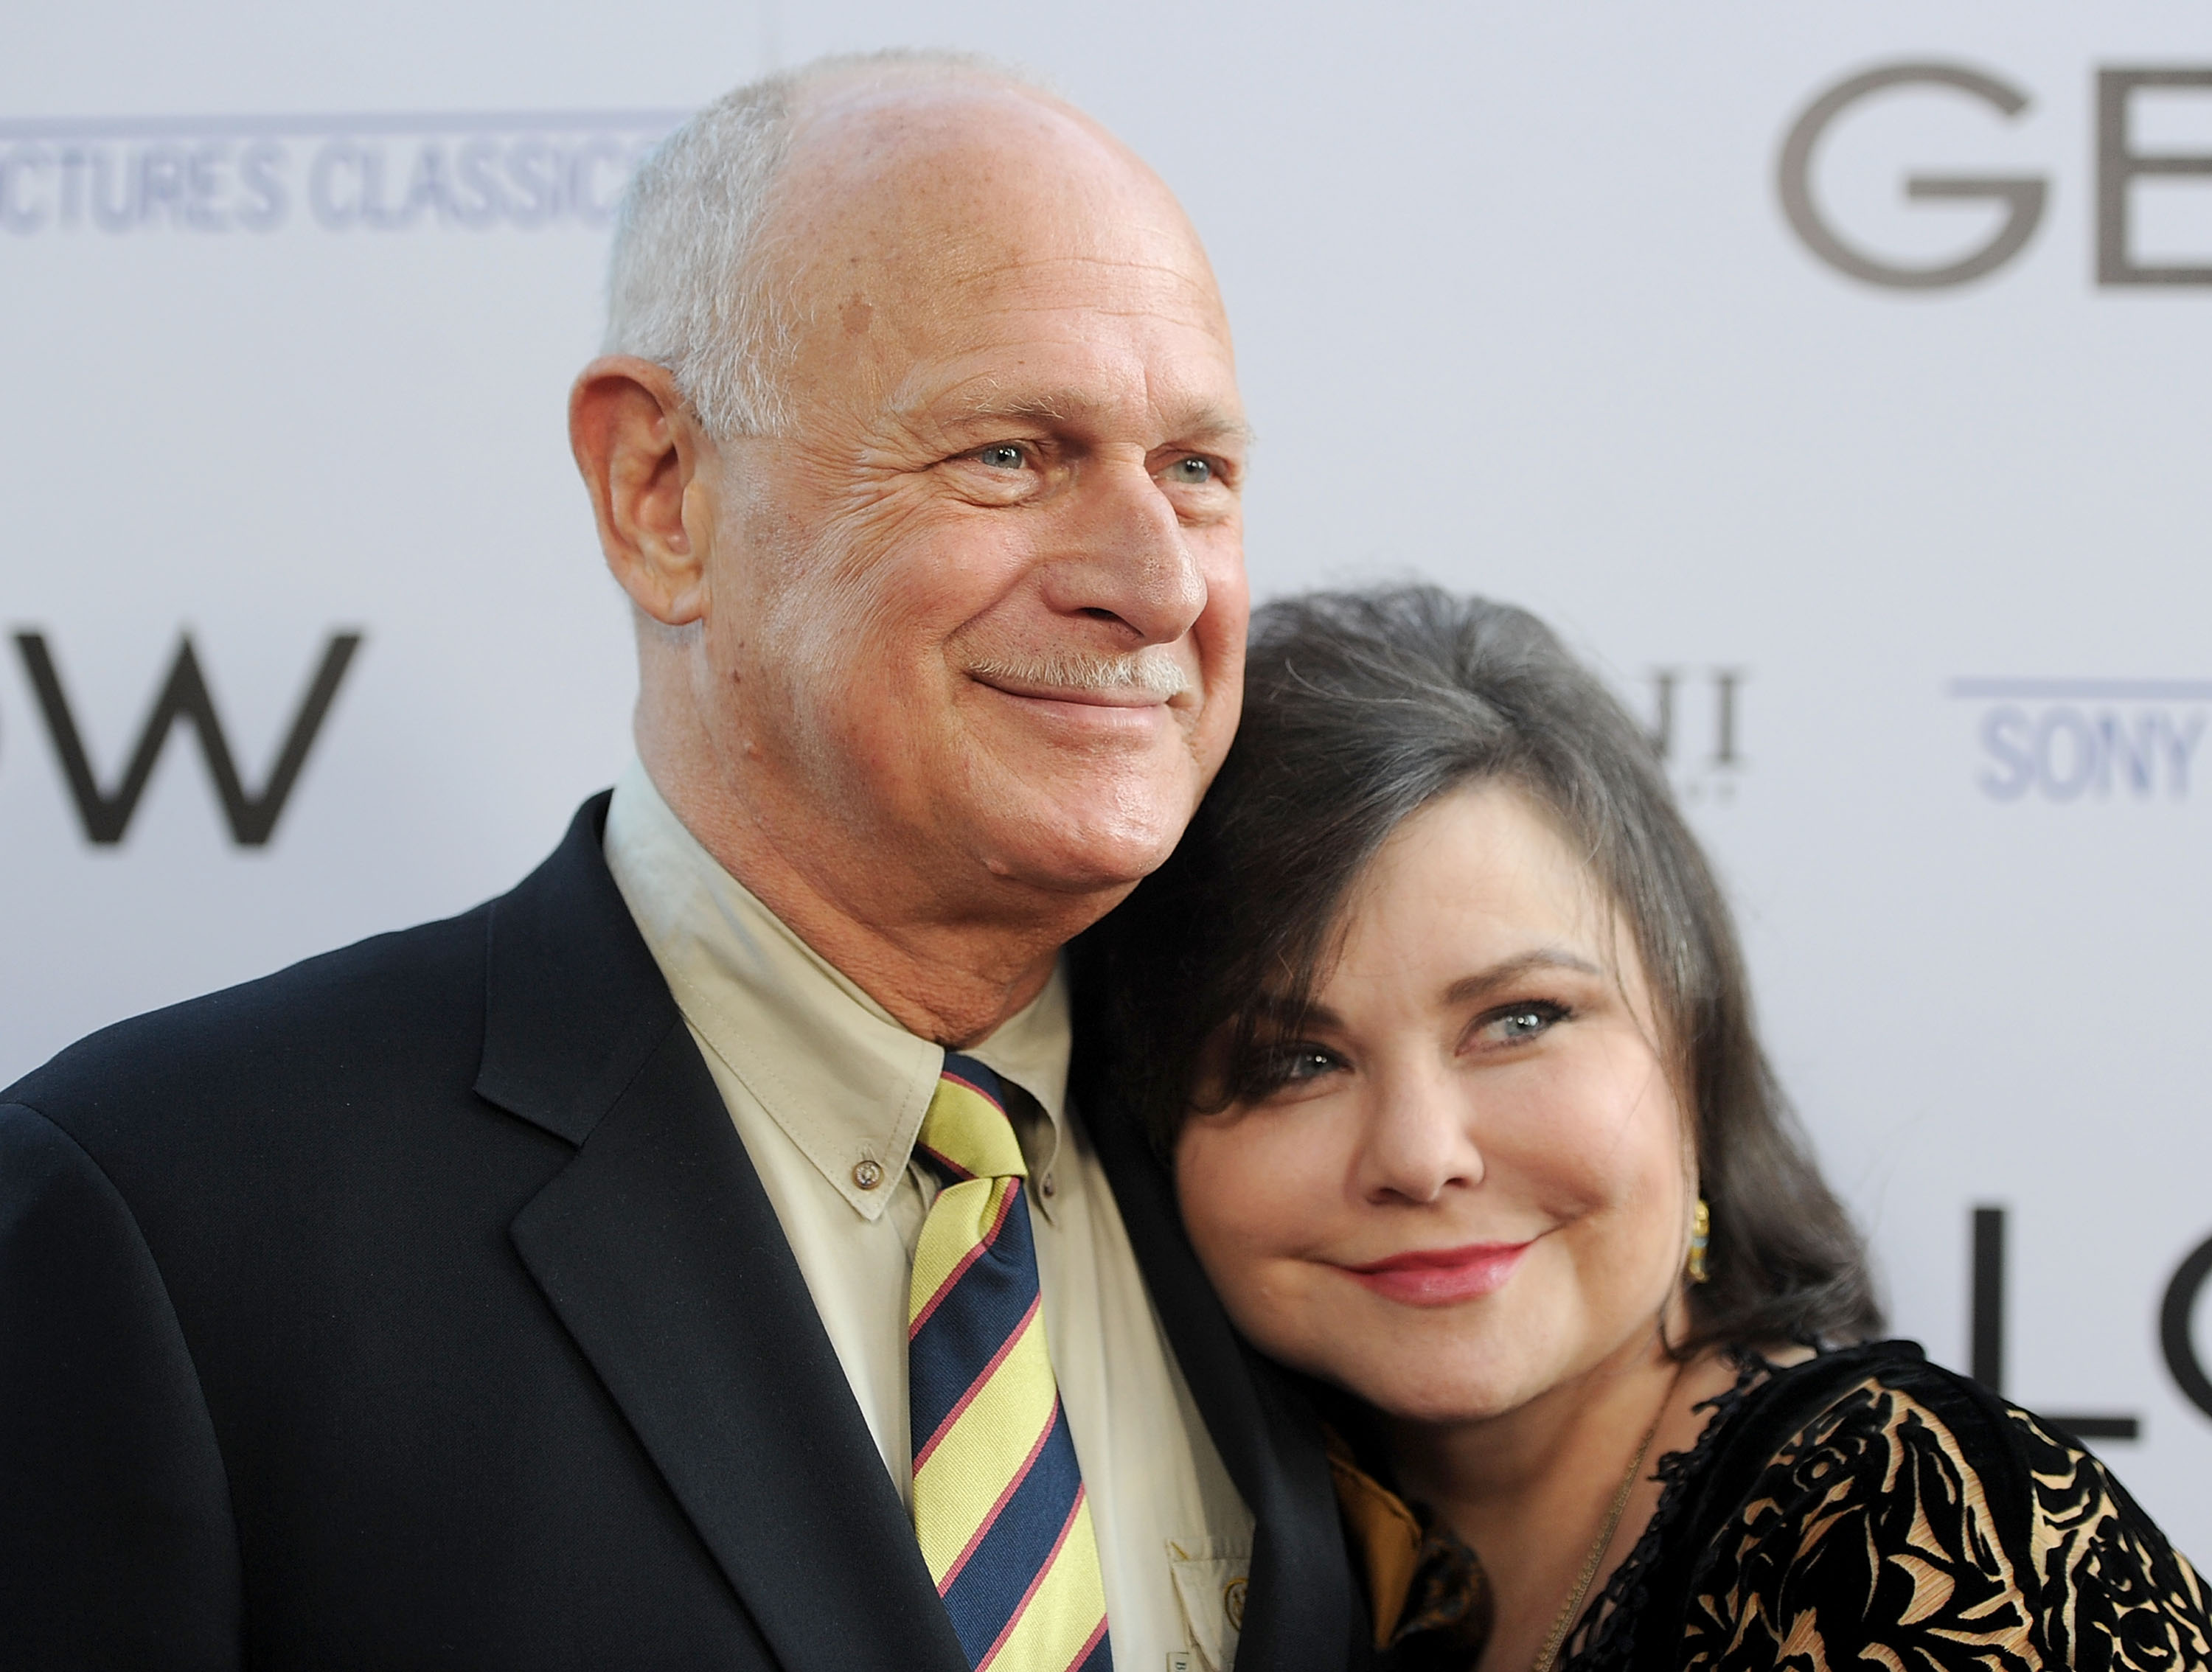 Gerald McRaney and Delta Burke AFI Associates & Sony Pictures Classics' premiere Of "Get Low" on July 27, 2010 in Beverly Hills, California | Source: Getty Images